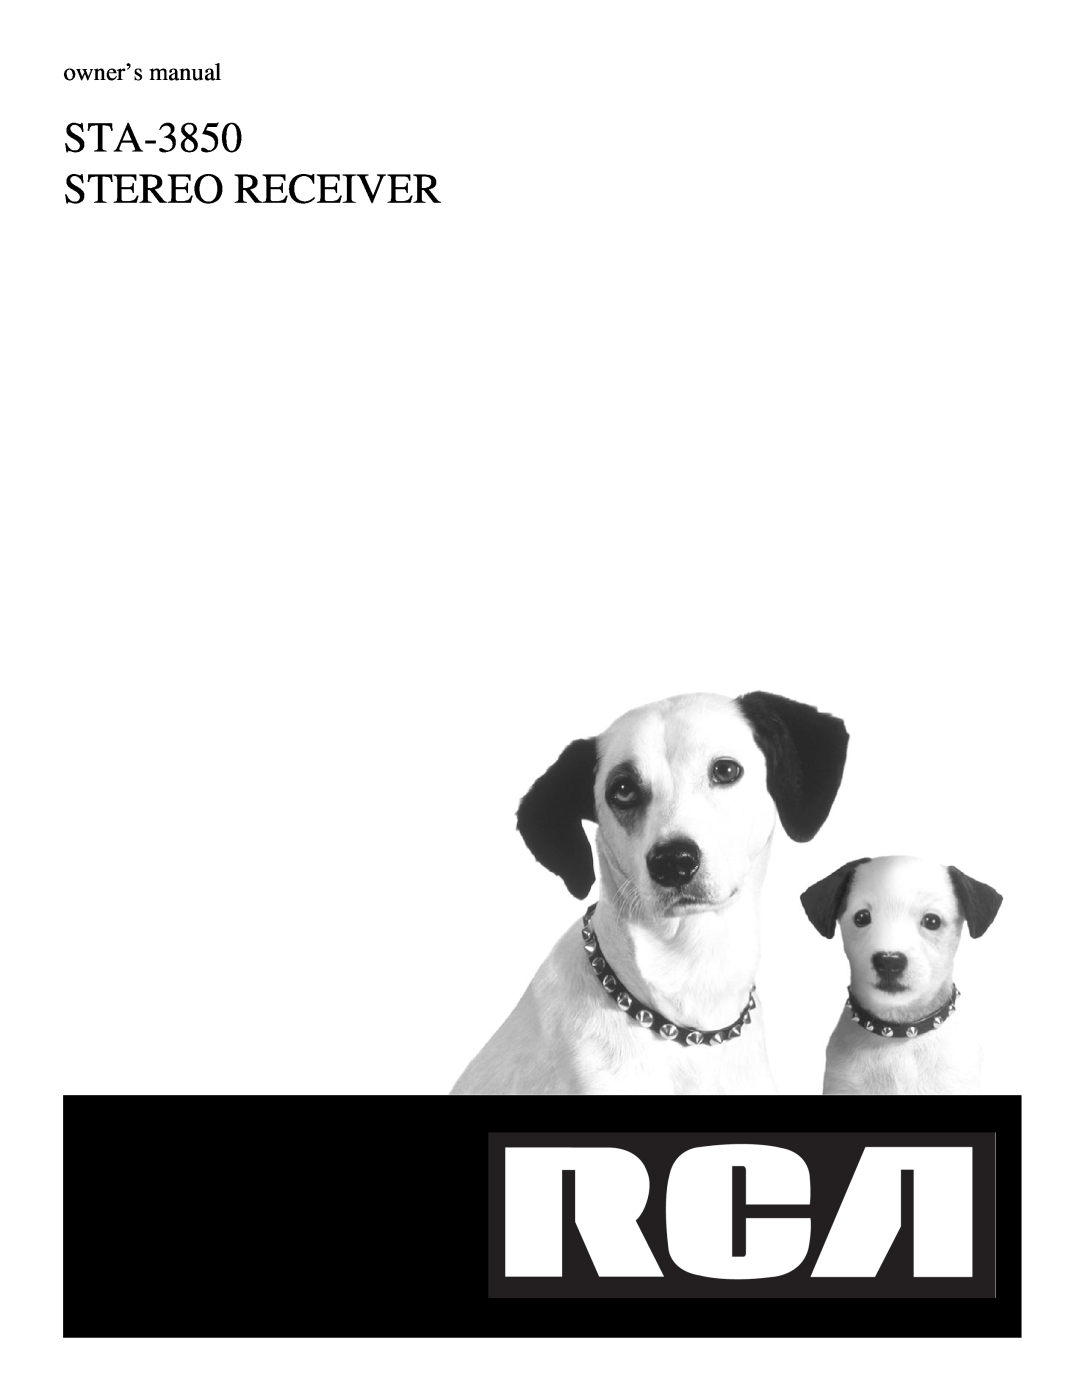 RCA owner manual STA-3850 STEREO RECEIVER 